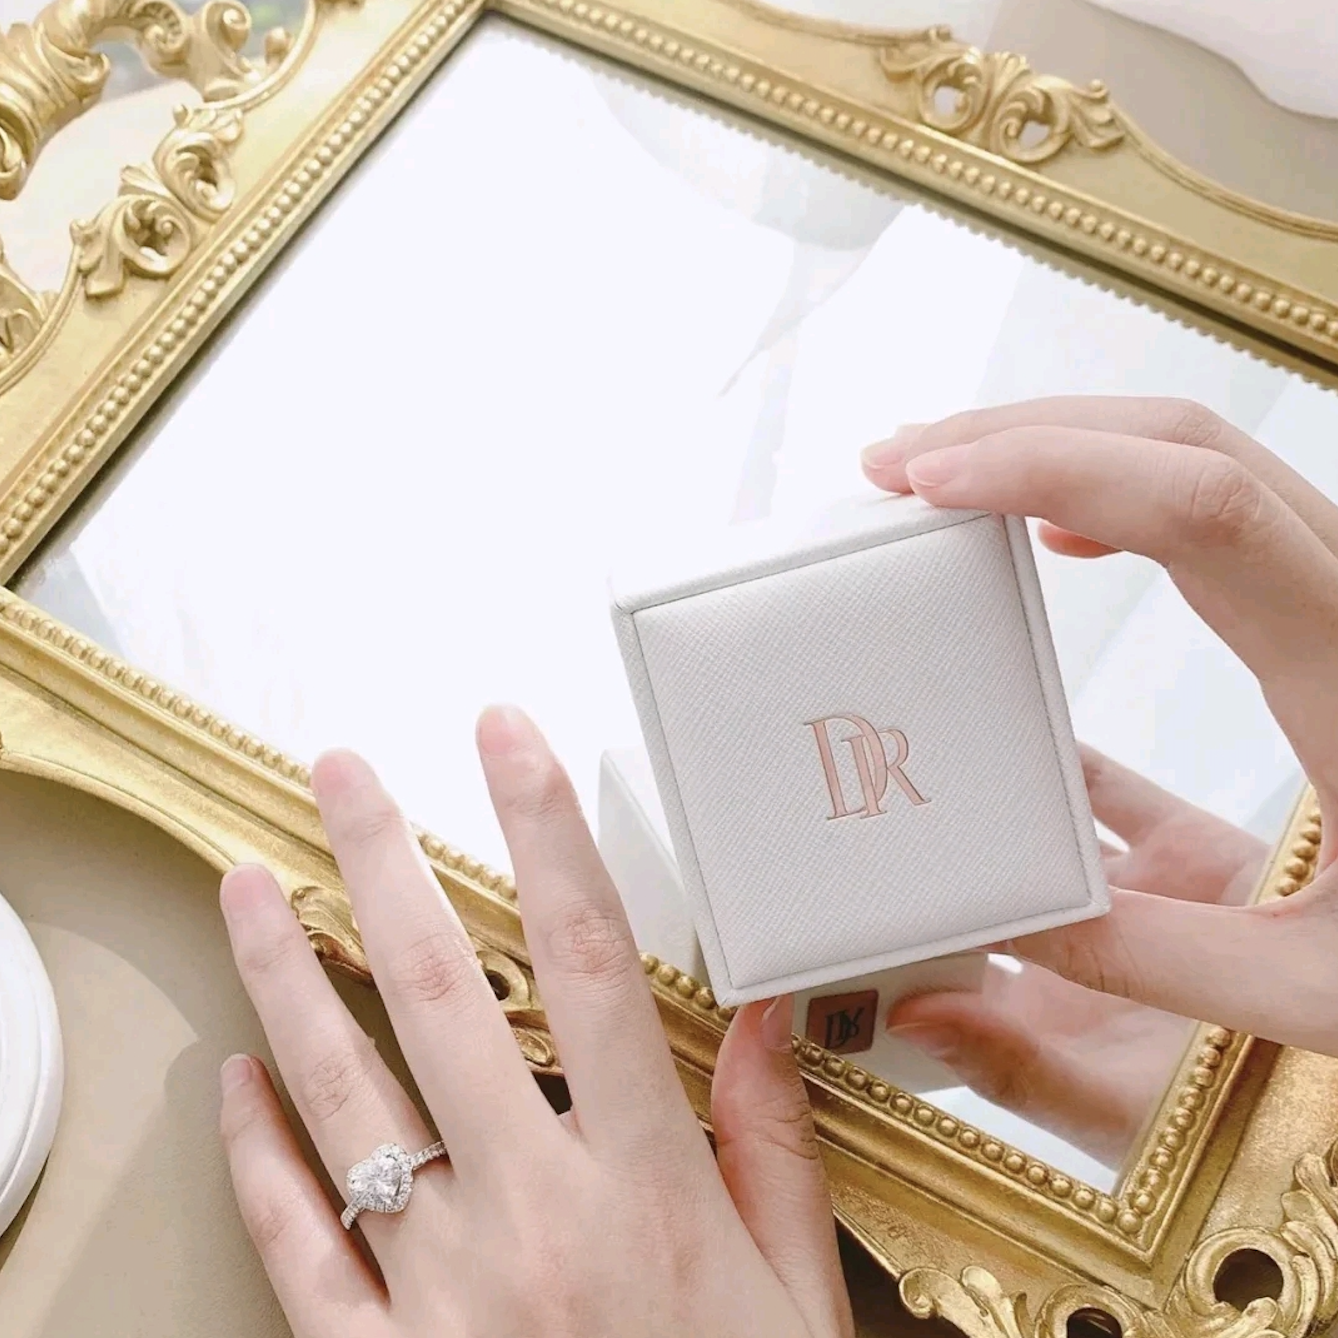 DR Ring Review—Should You Buy a DR Diamond Ring? - Broke and Chic